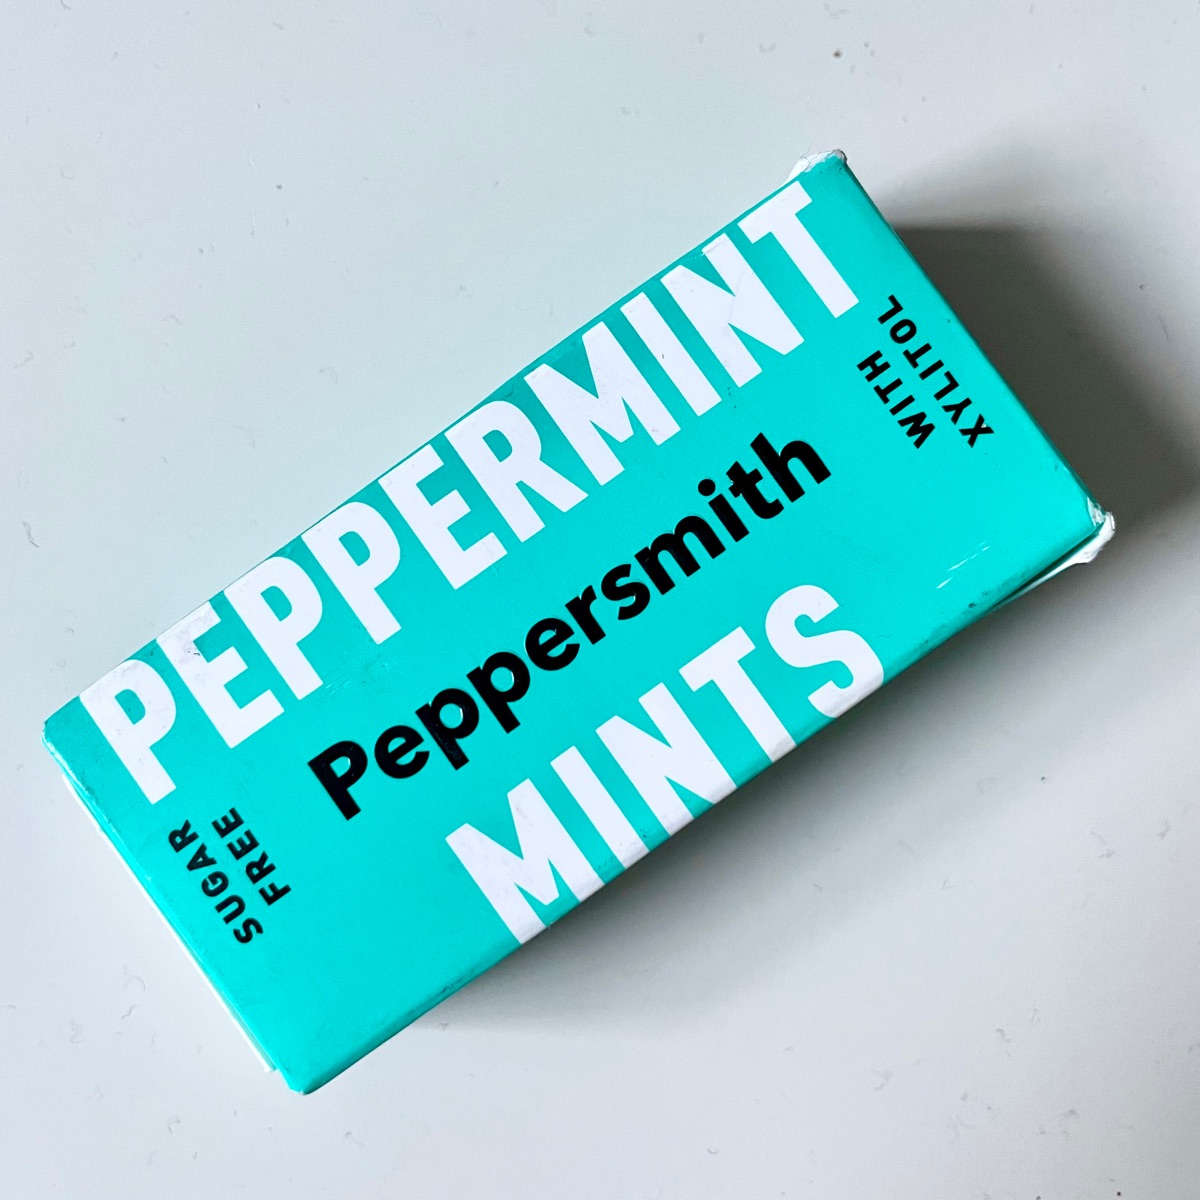 Peppersmith referral